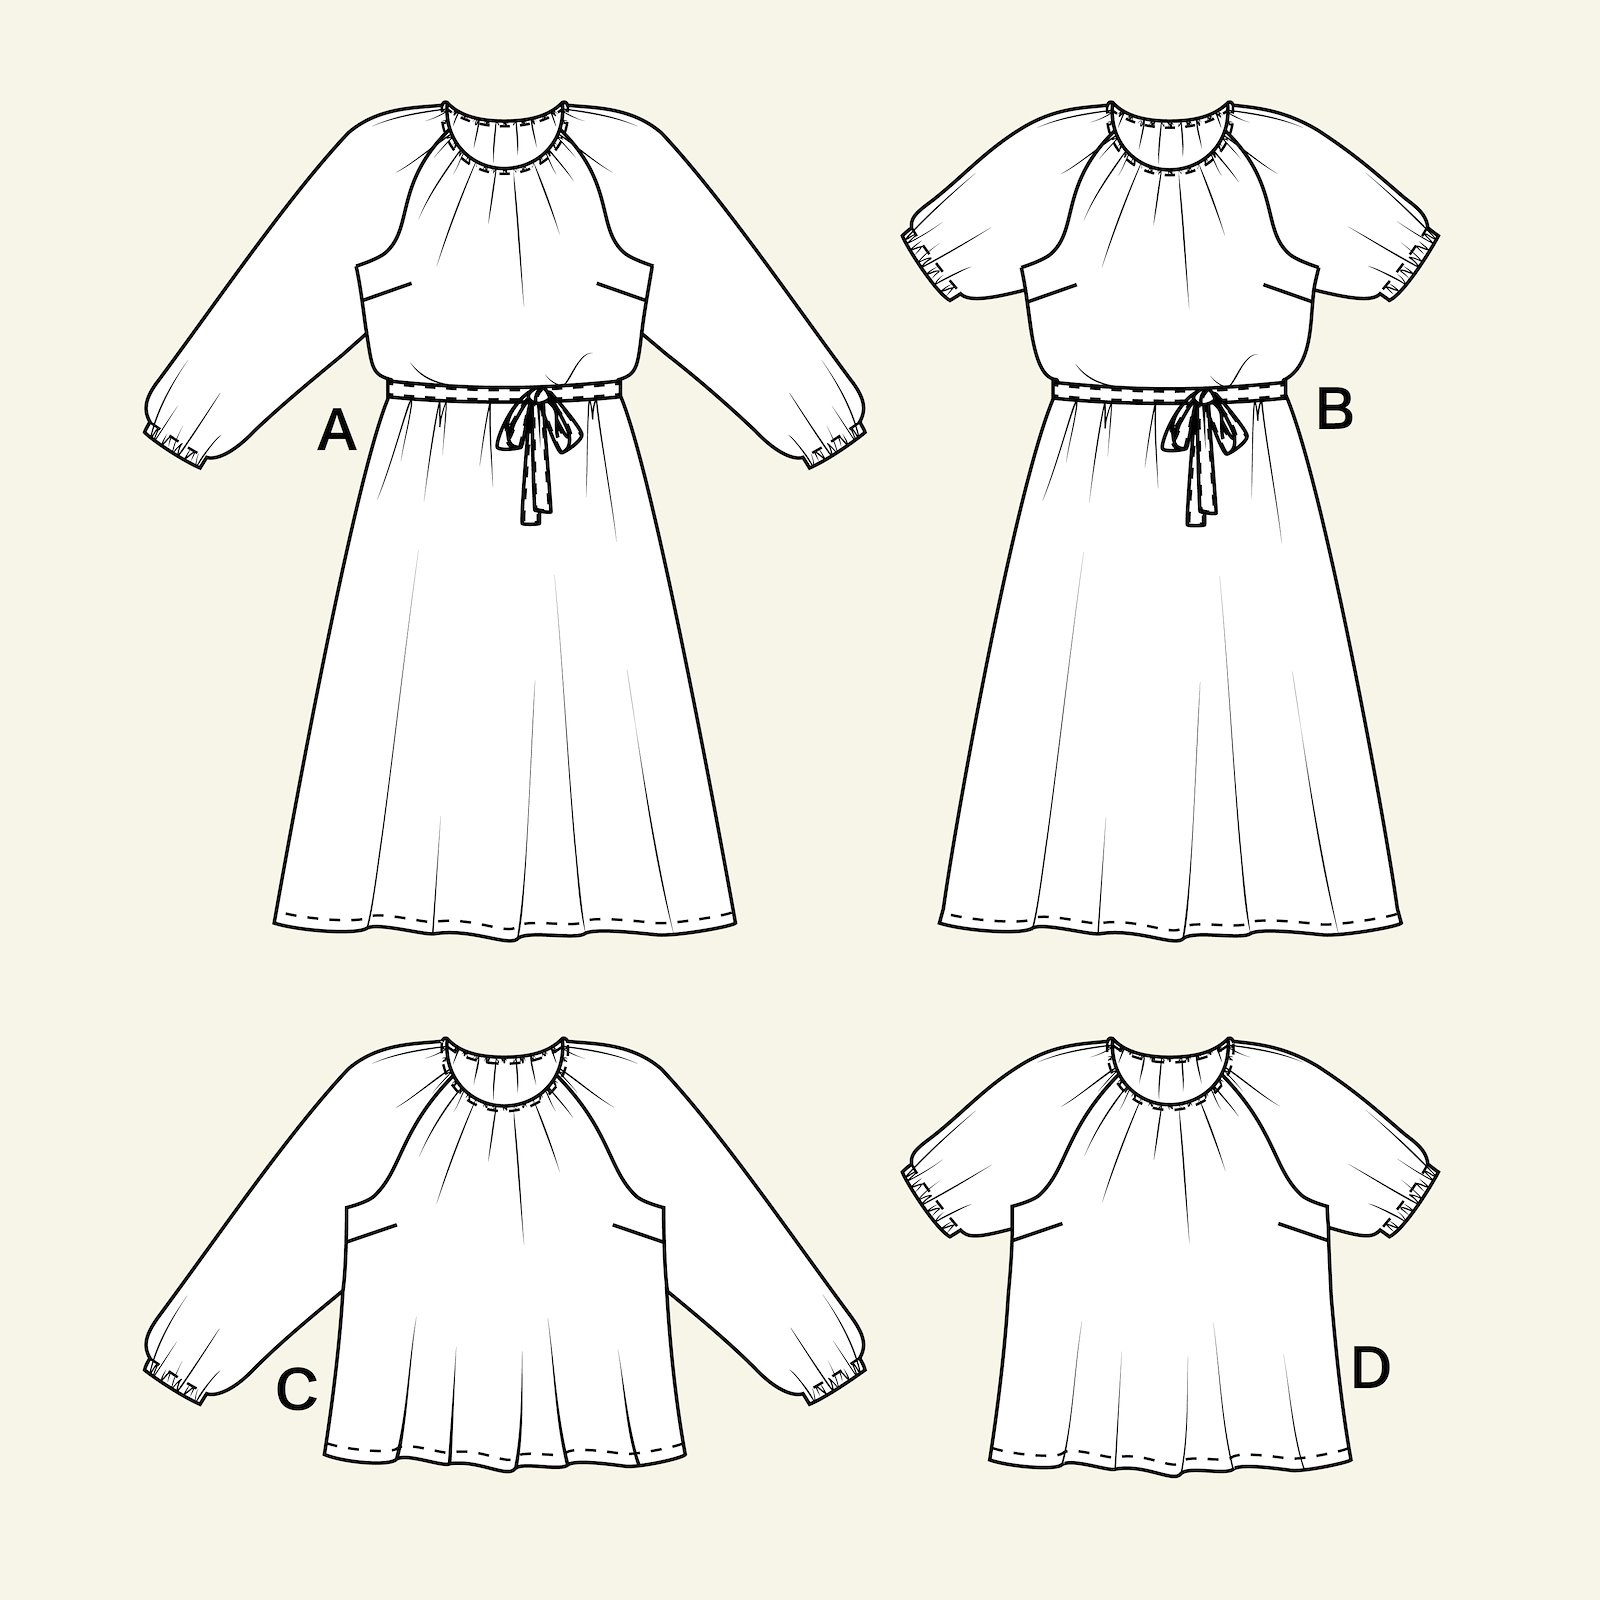 Dress with belt and blouse, 38/10 p23167000_p23167001_p23167002_p23167003_p23167004_pack_b.png